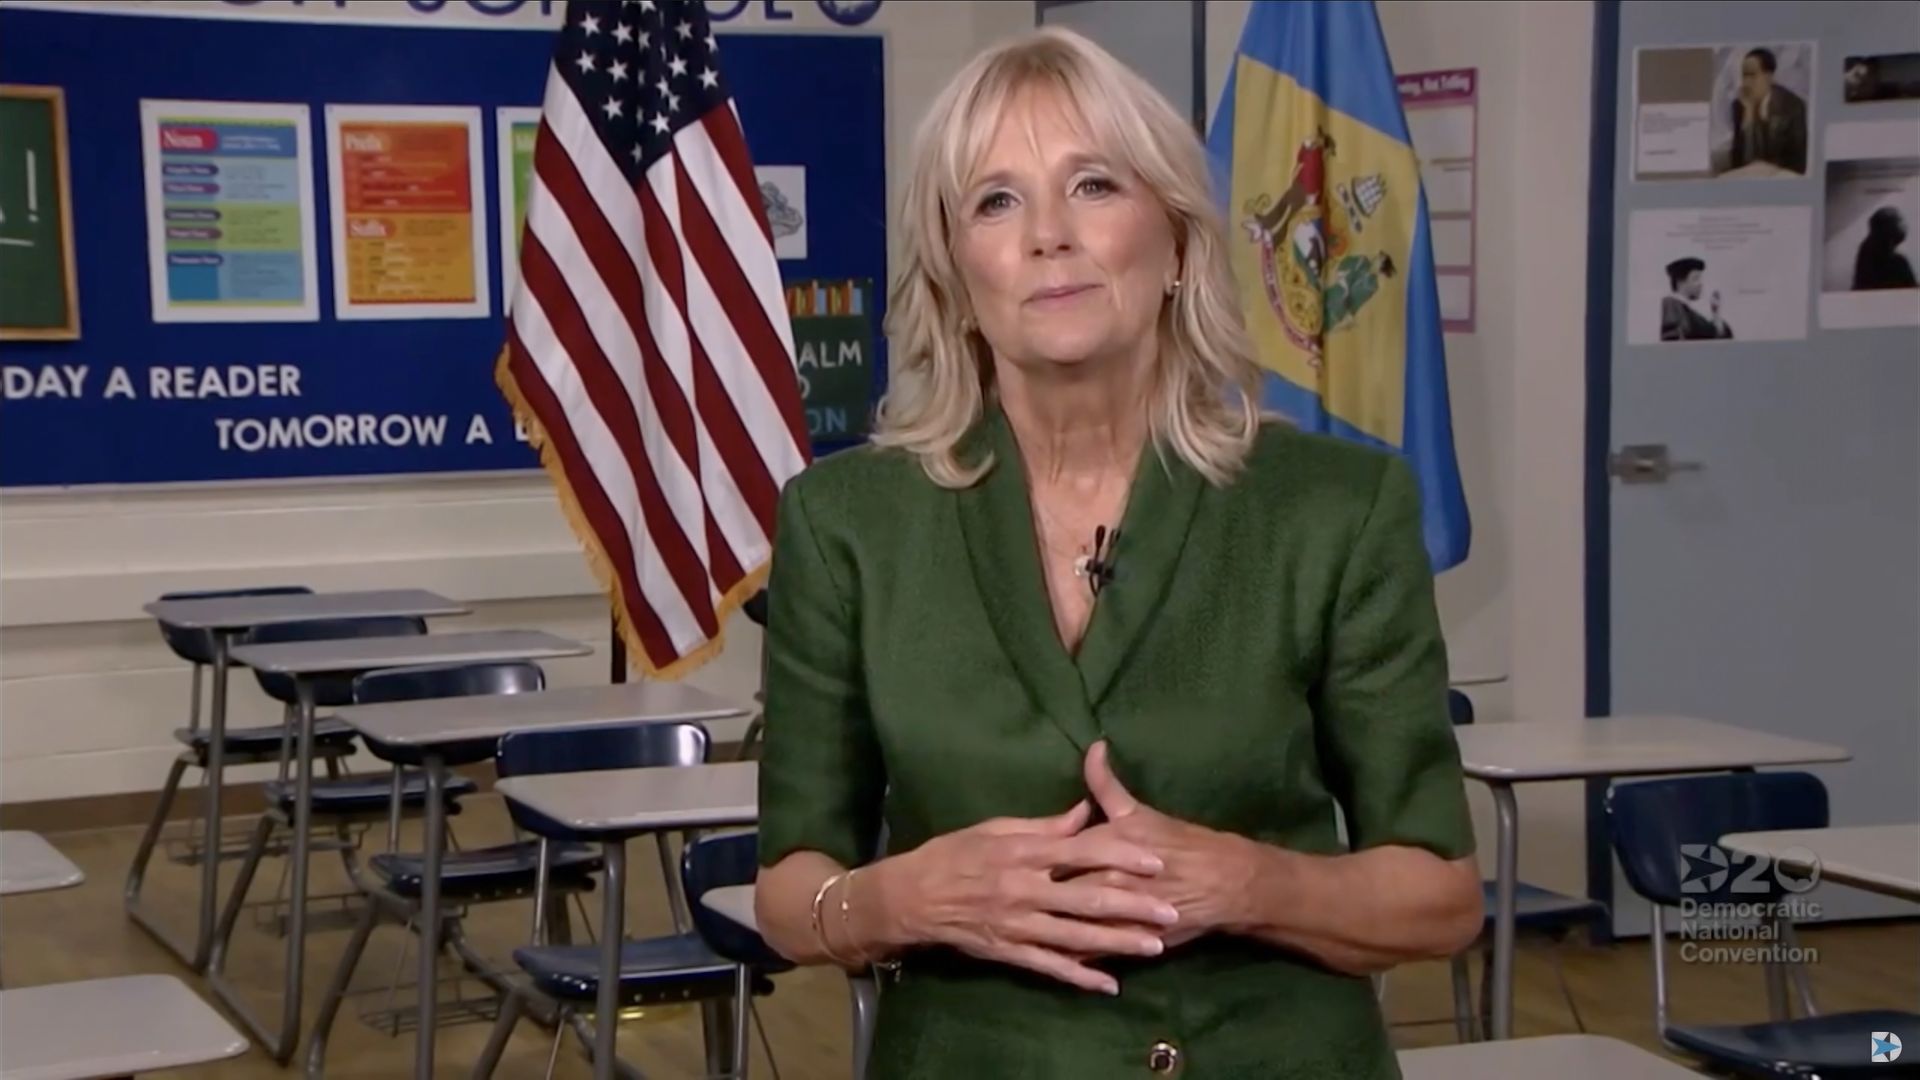 In this screenshot from the 2020 Democratic National Convention, Jill Biden addresses from a classroom the virtual convention on August 18